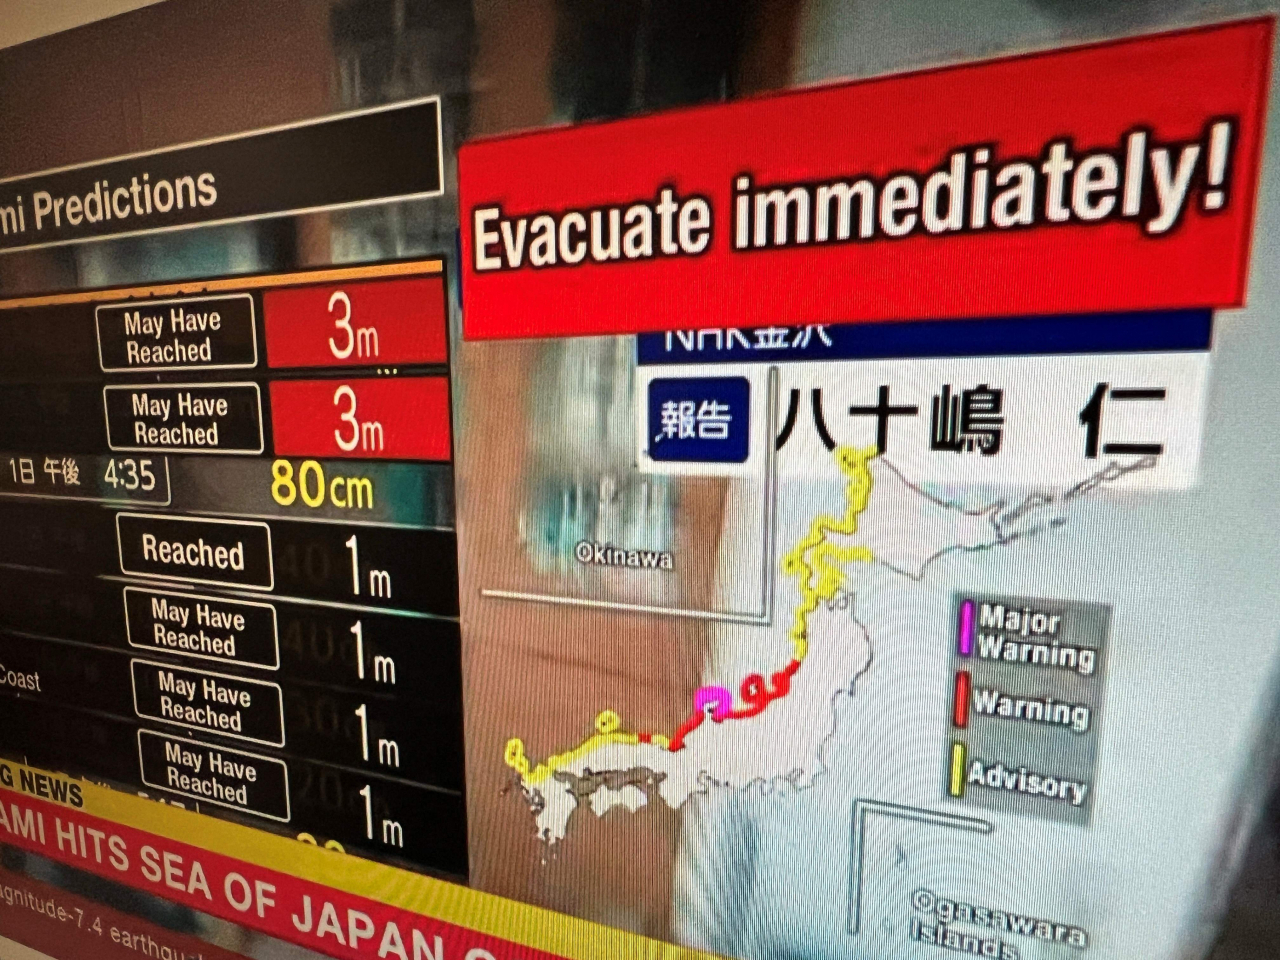 This image taken in Hong Kong on Monday shows a warning message on a screen from a live feed on NHK World asking people to evacuate from the area after a series of major earthquakes hit central Japan. (AFP-Yonhap)